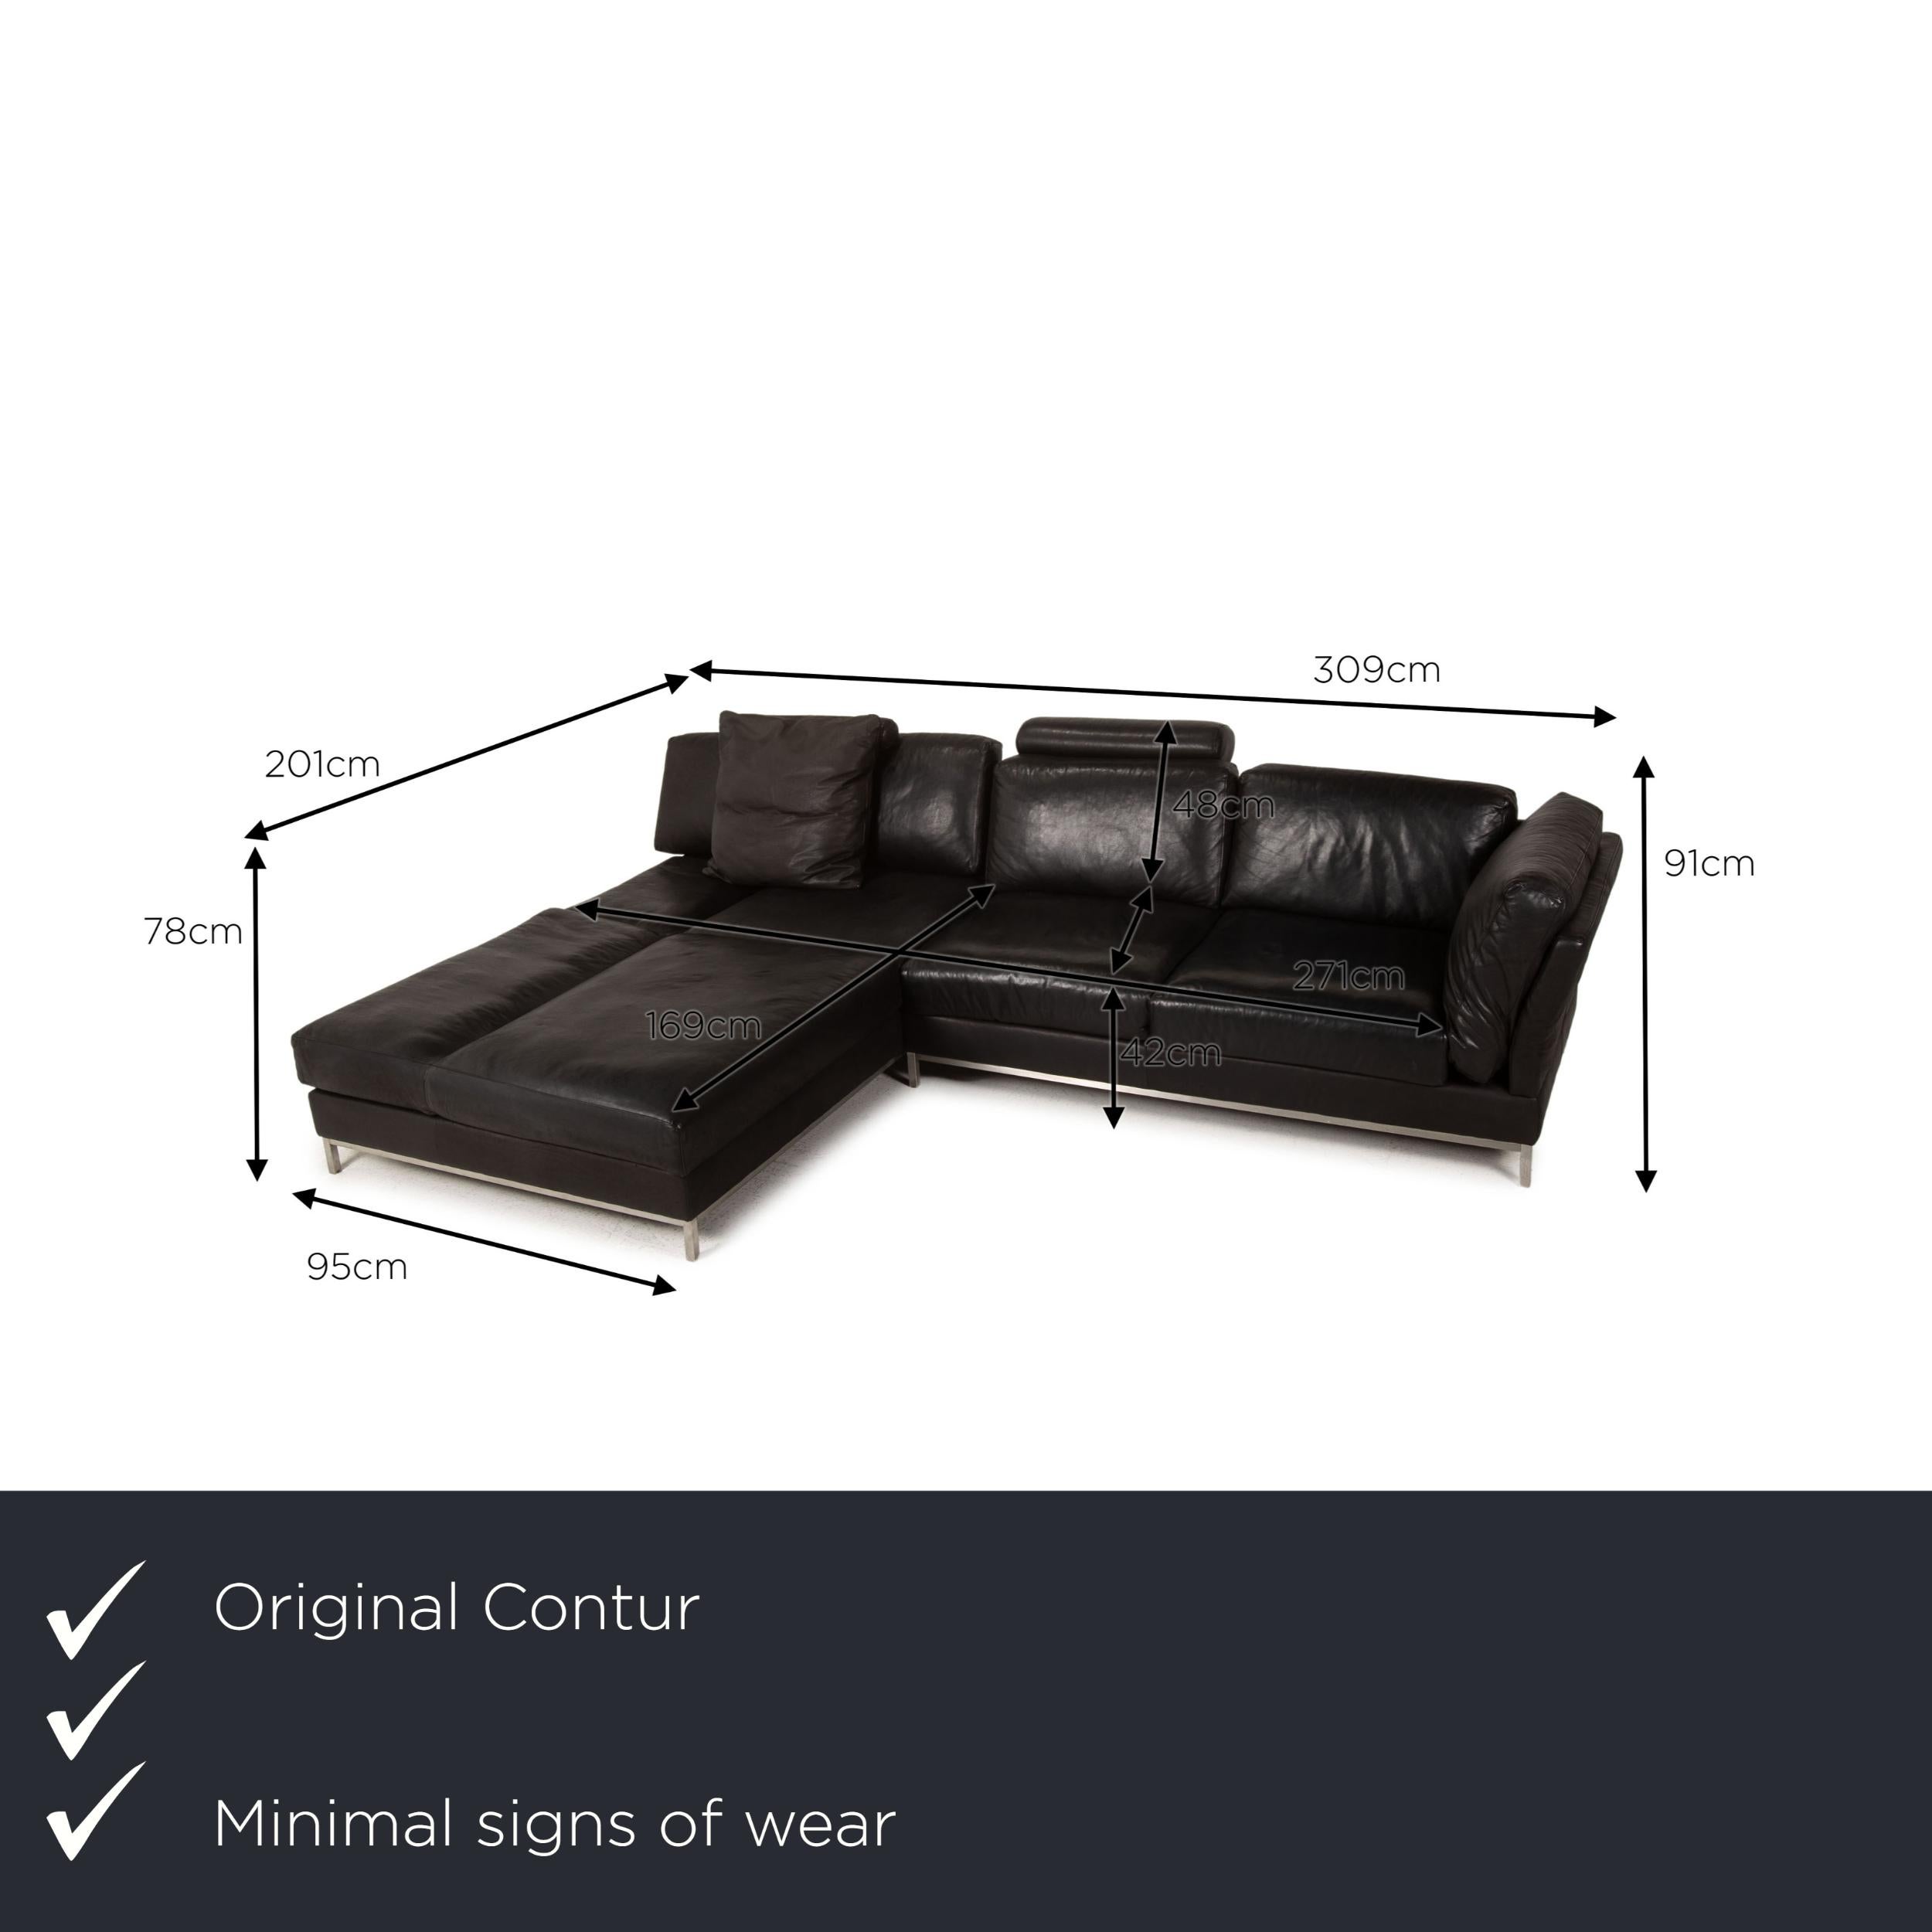 We present to you a Contur Semino leather sofa black corner sofa couch.


 Product measurements in centimeters:
 

Depth: 95
Width: 201
Height: 91
Seat height: 42
Rest height: 78
Seat depth: 271
Seat width: 271
Back height: 48.
 